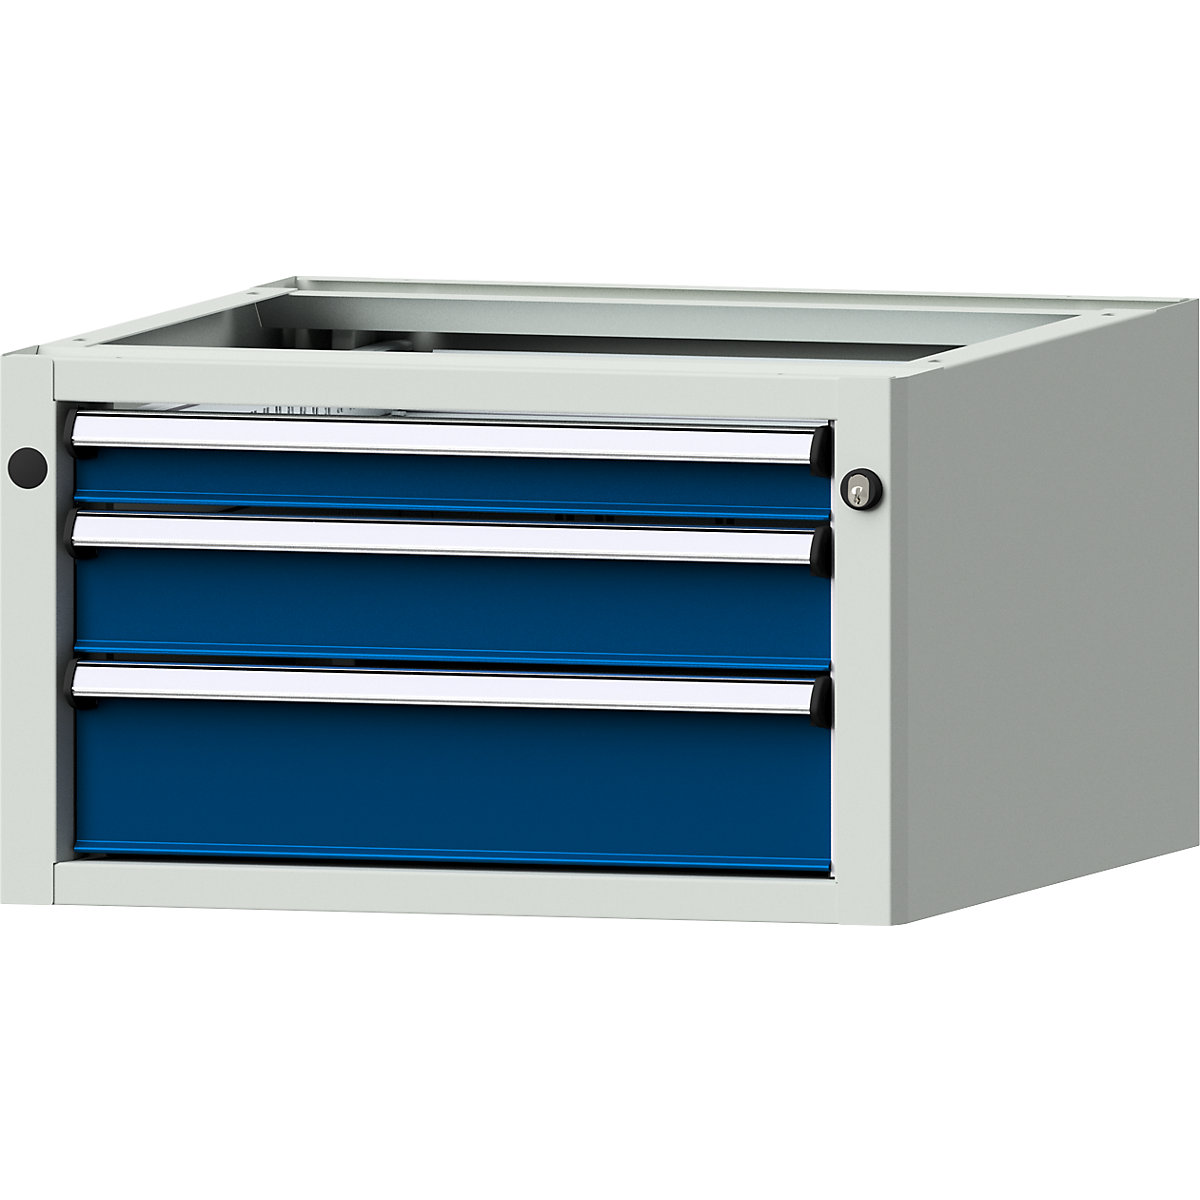 Add-on drawer unit for electrically height adjustable LIFT work tables – ANKE, WxD 570 x 615 mm, height 330 mm, 3 drawers-2